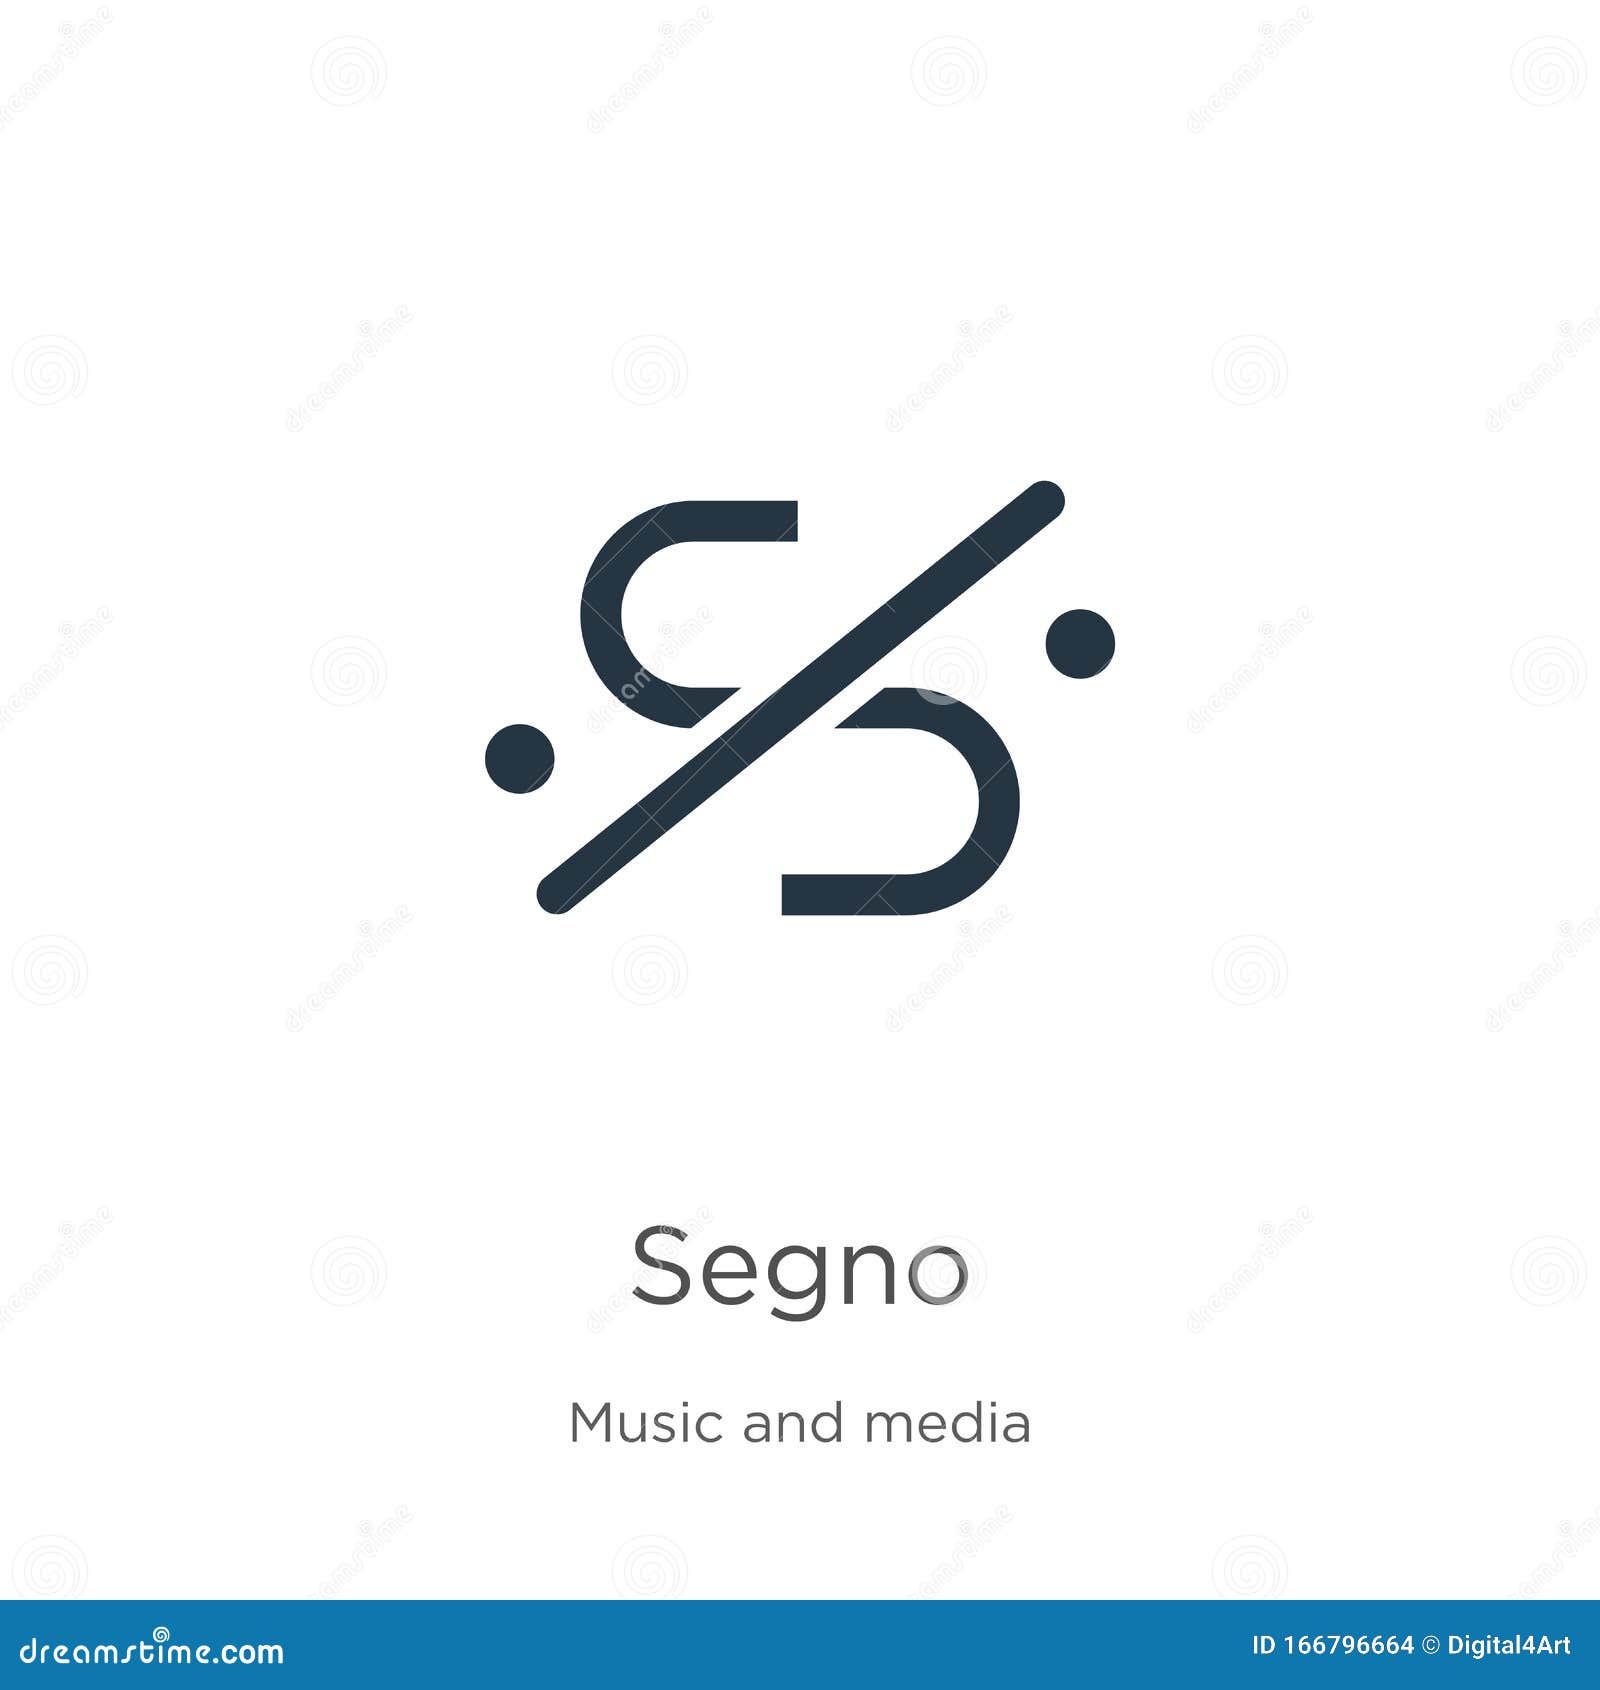 segno icon . trendy flat segno icon from music and media collection  on white background.   can be